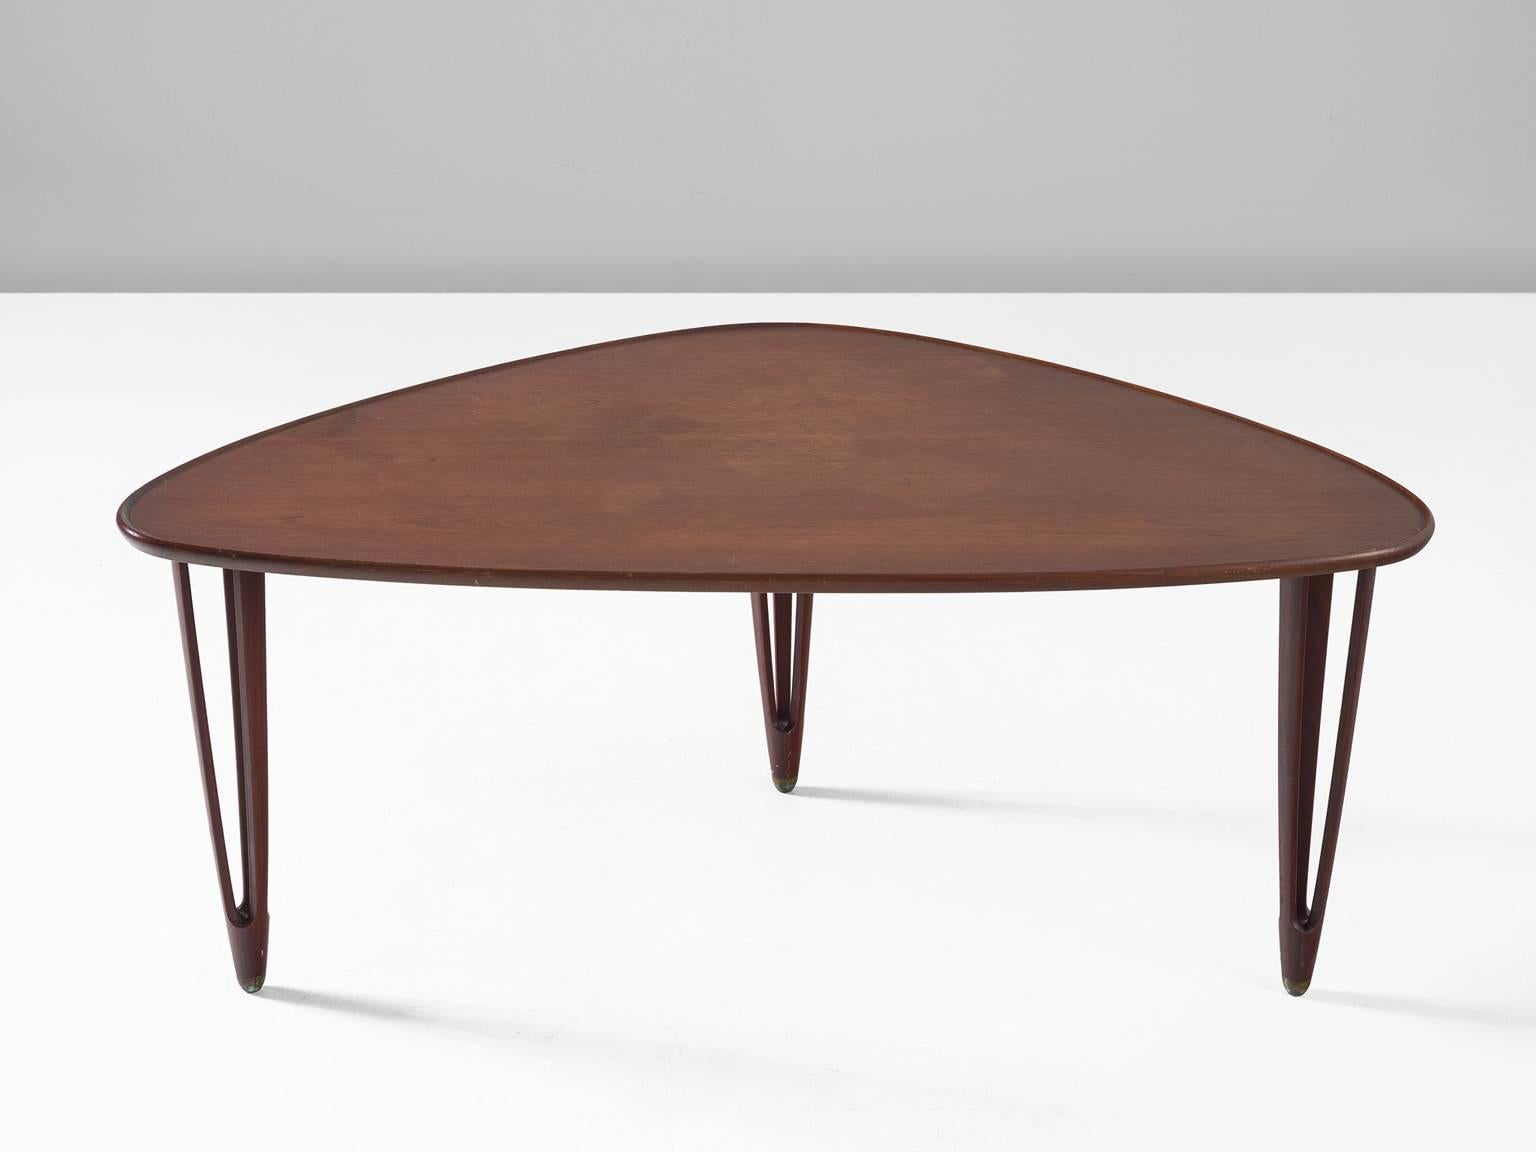 Coffee table, teak, B.C. Møbler, Denmark, 1950s. 

This graceful asymmetrical tripod coffee table made from teak with rounded edges and brass feet is produced by Danish company B.C. Møbler in the 1950s. The side table is exemplary for Scandinavian